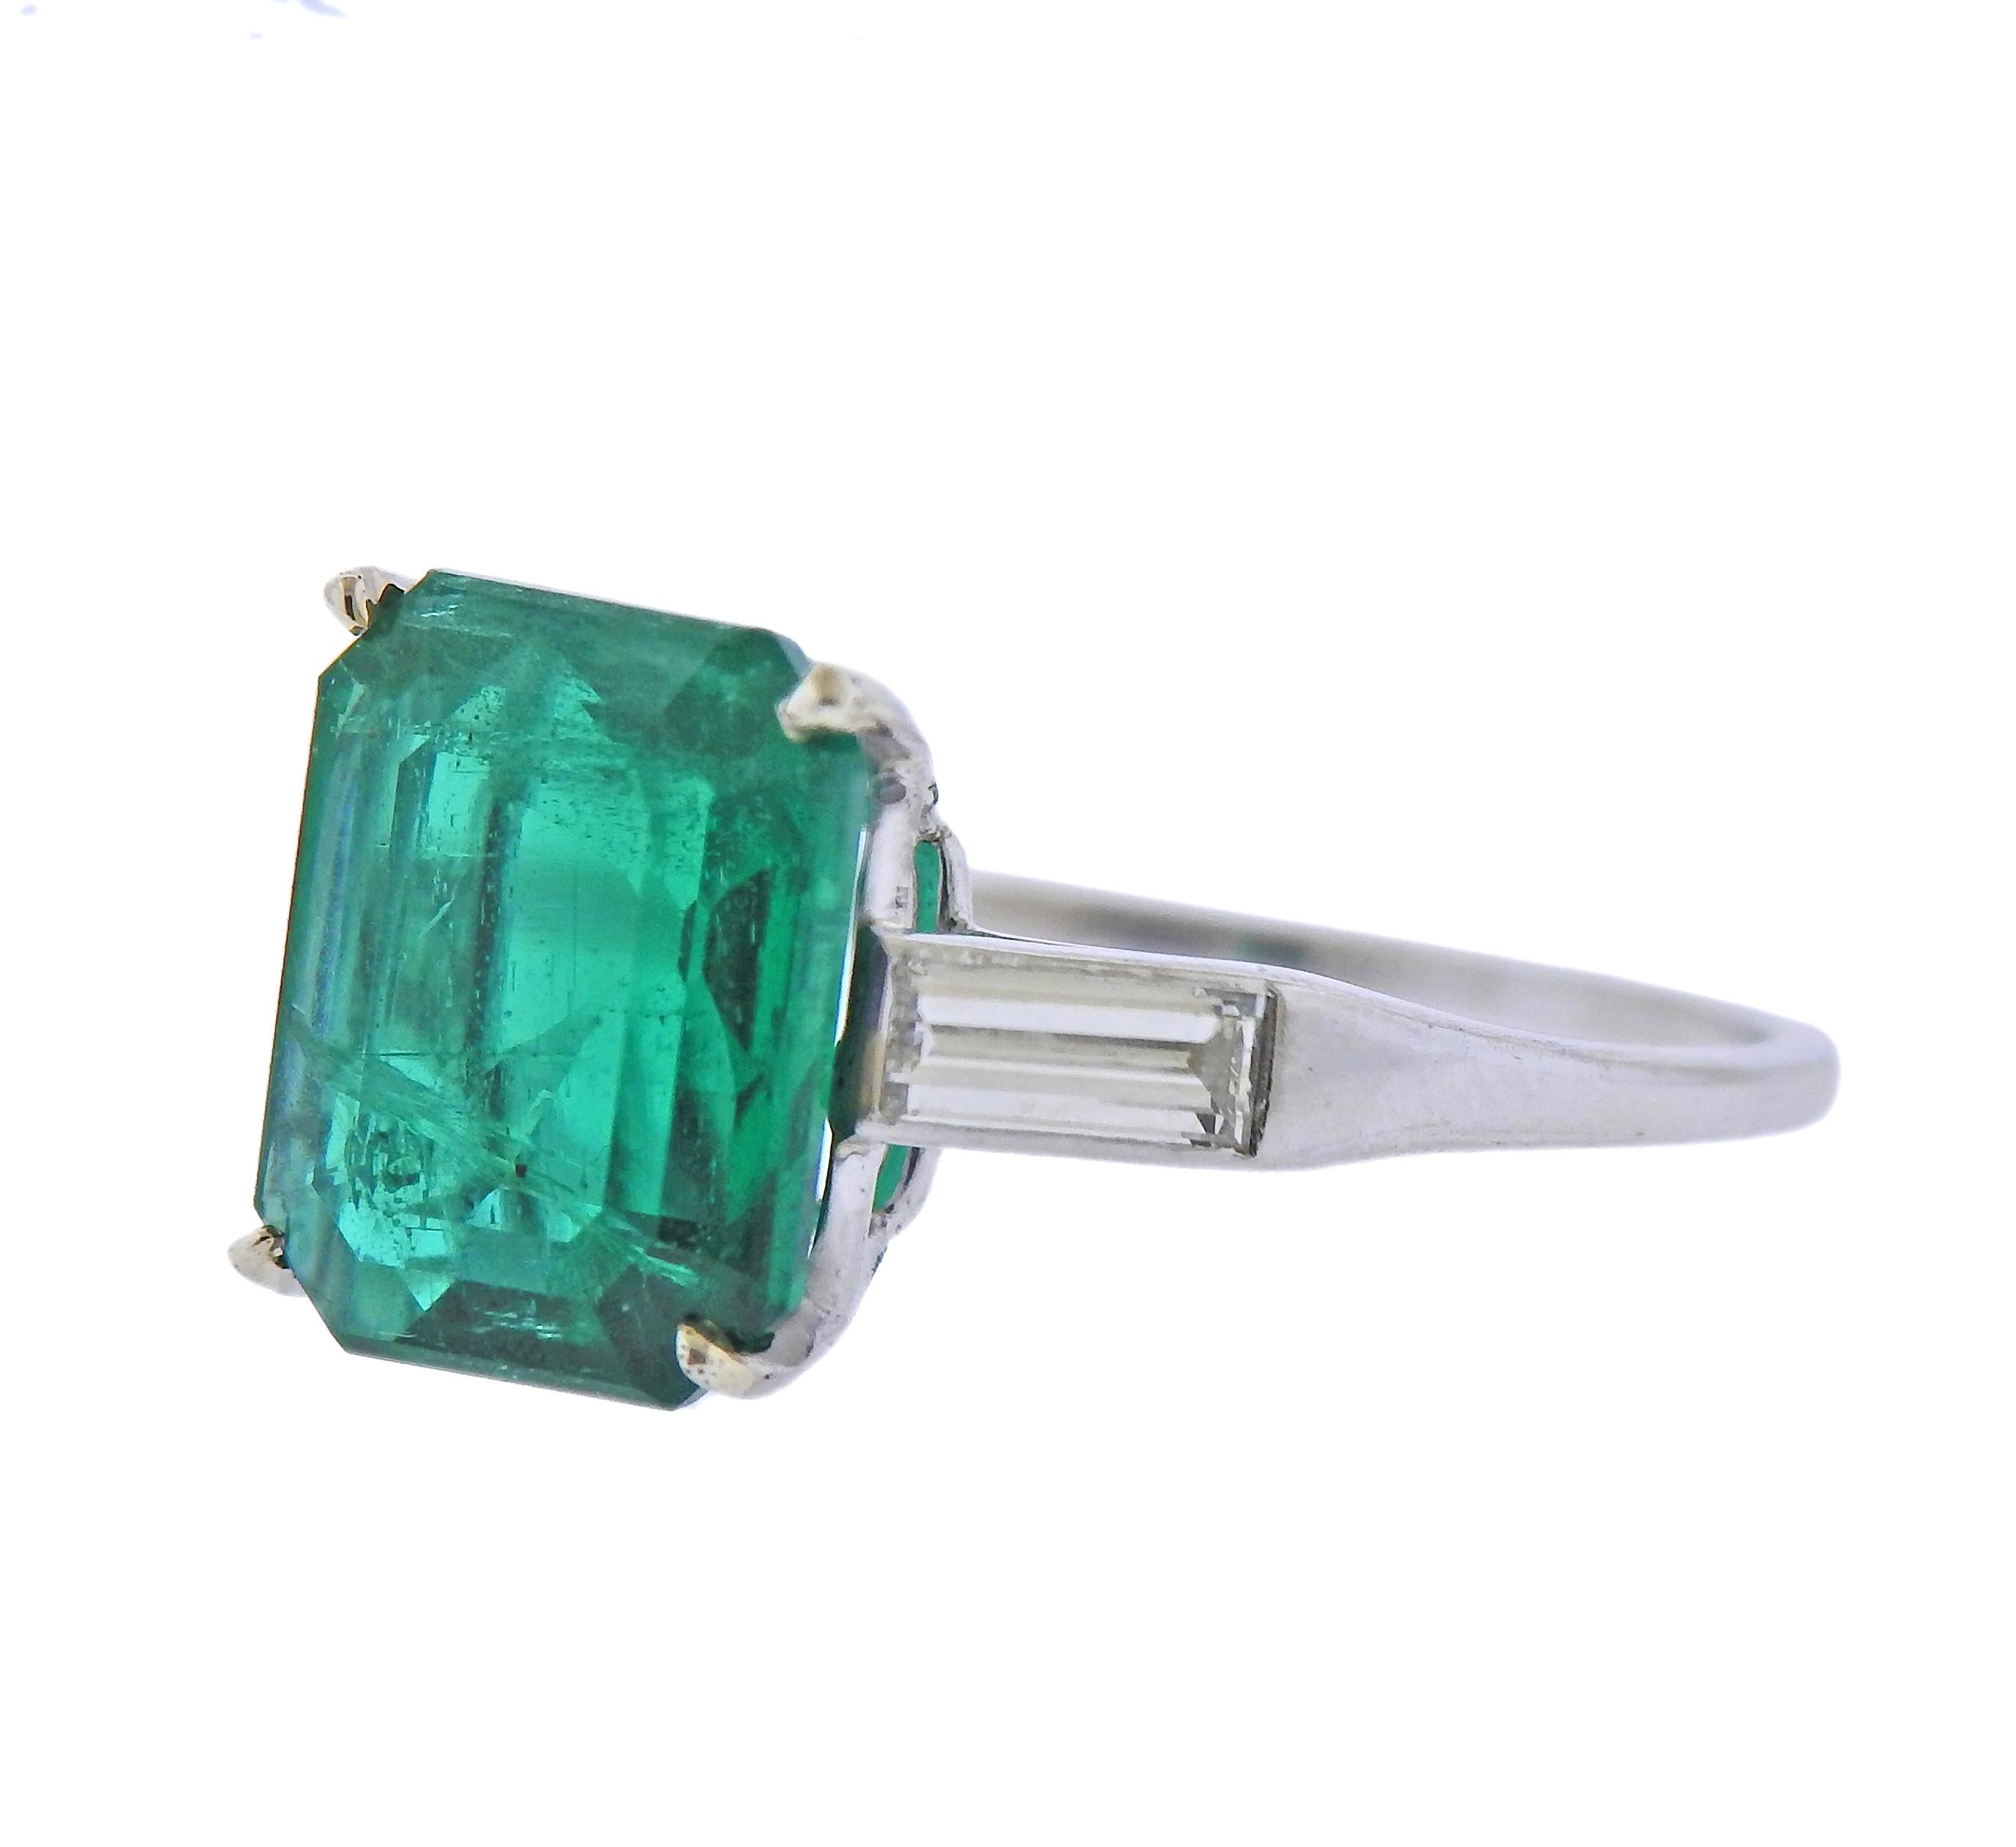 Platinum ring with approx. 3.70ct emerald  (approx. 11.3 x 9.15 x 4.97mm), with two baguette diamonds on sides  - approx. 0.20ctw. Ring size - 8. Marked:  4091, 59-2. Weight - 4.1 grams. 